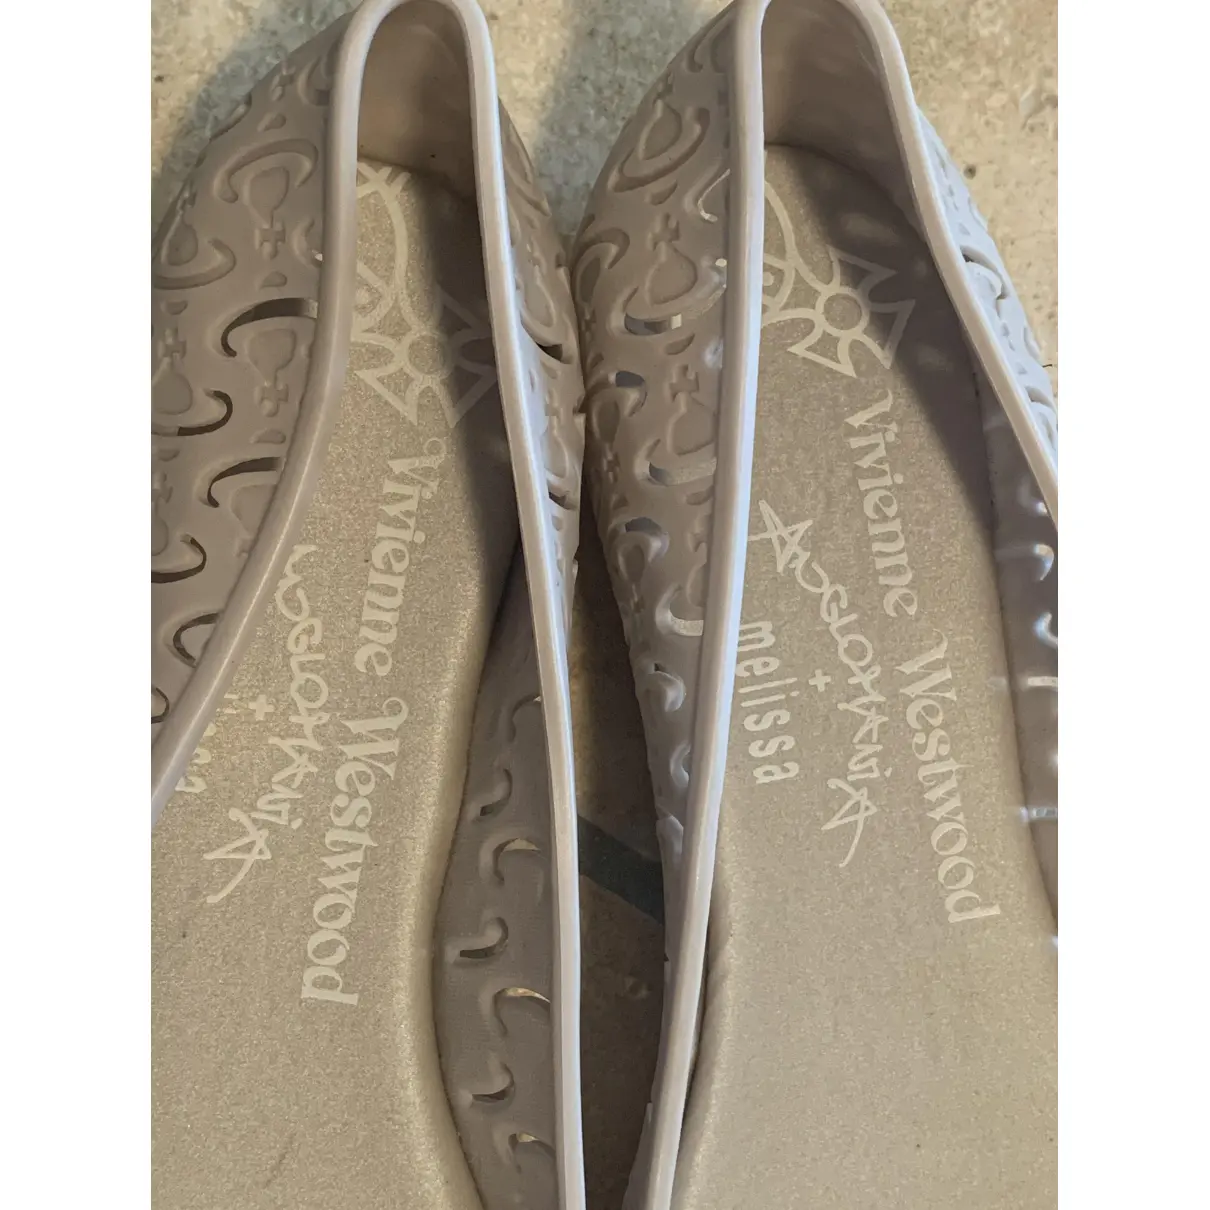 Ballet flats Vivienne Westwood Anglomania